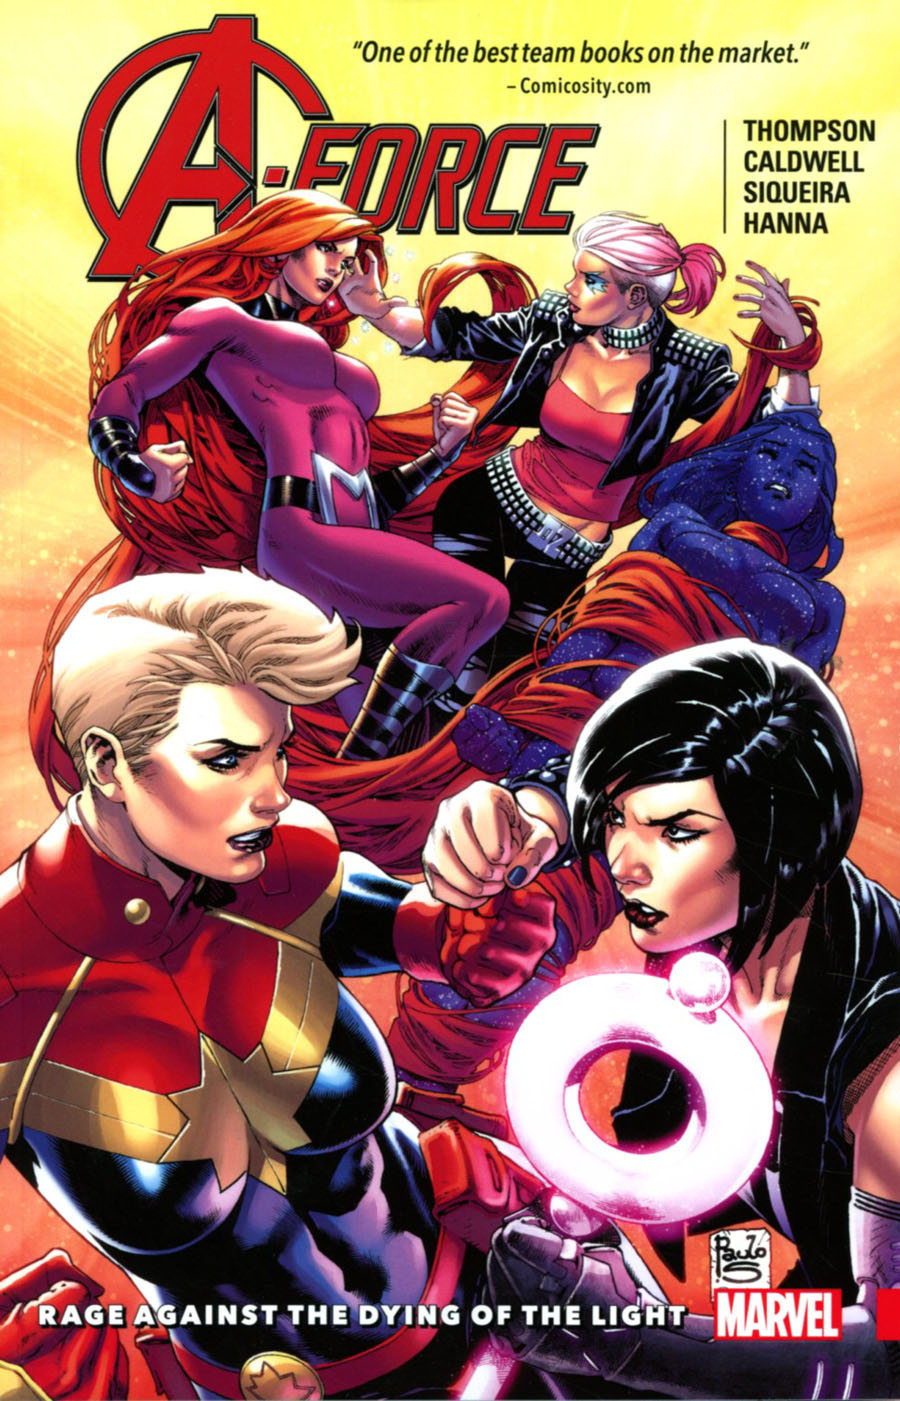 A-Force Vol 2 Rage Against The Dying Of The Light TP